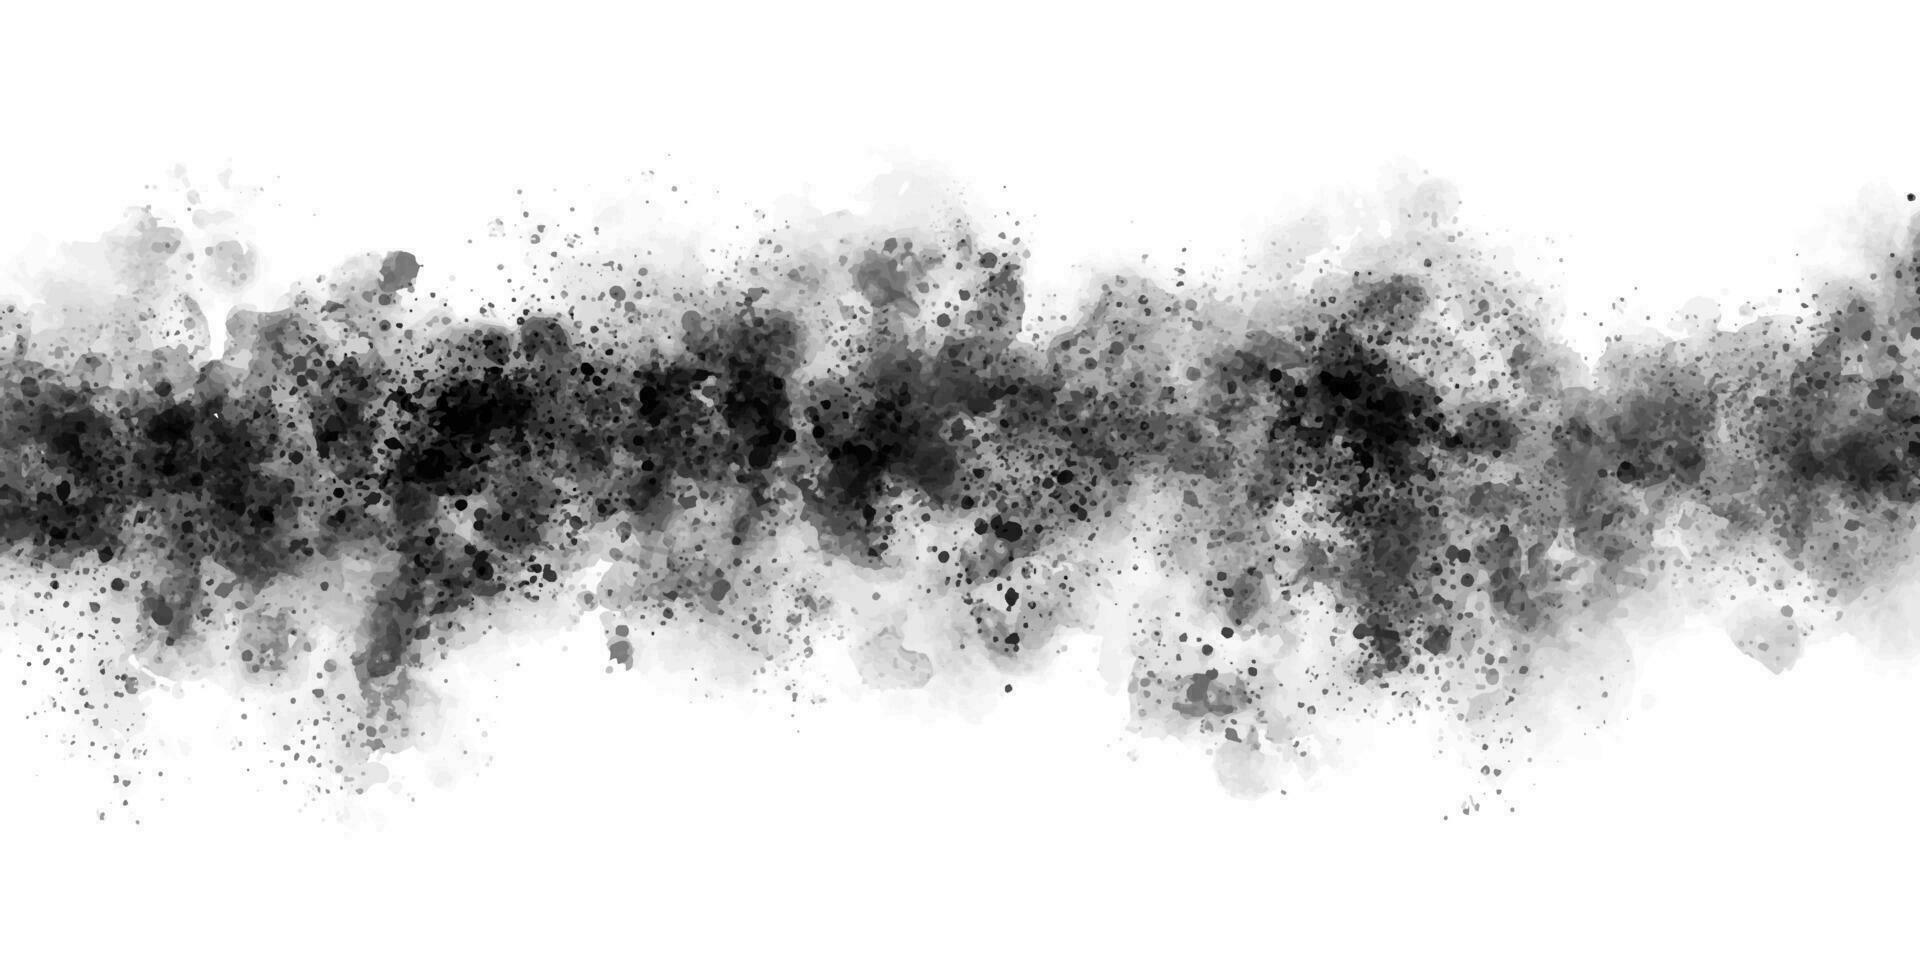 black splatter watercolor hand drawn background. Splashes, blots, watercolor stains vector